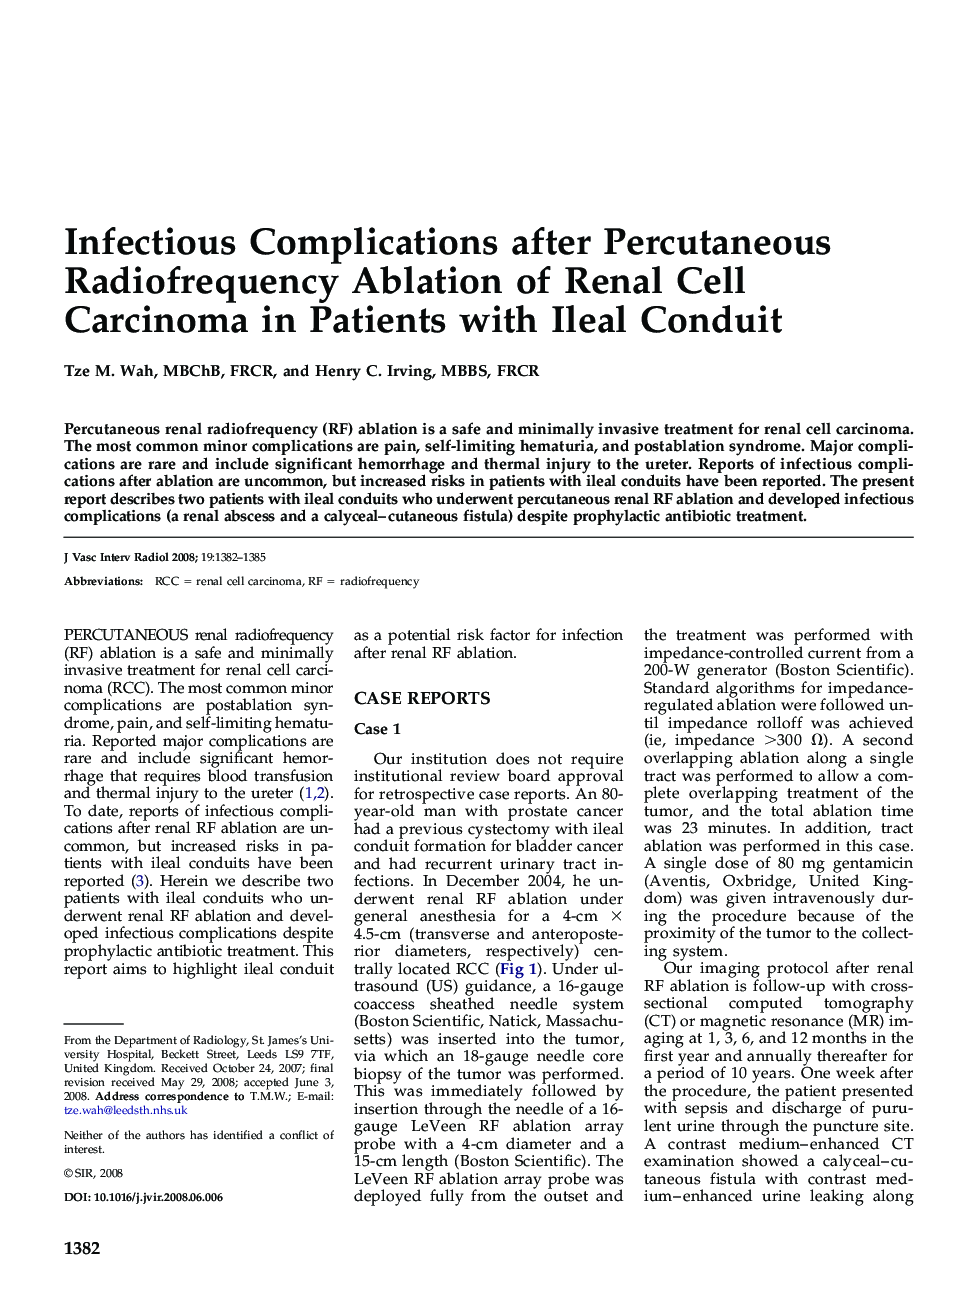 Infectious Complications after Percutaneous Radiofrequency Ablation of Renal Cell Carcinoma in Patients with Ileal Conduit